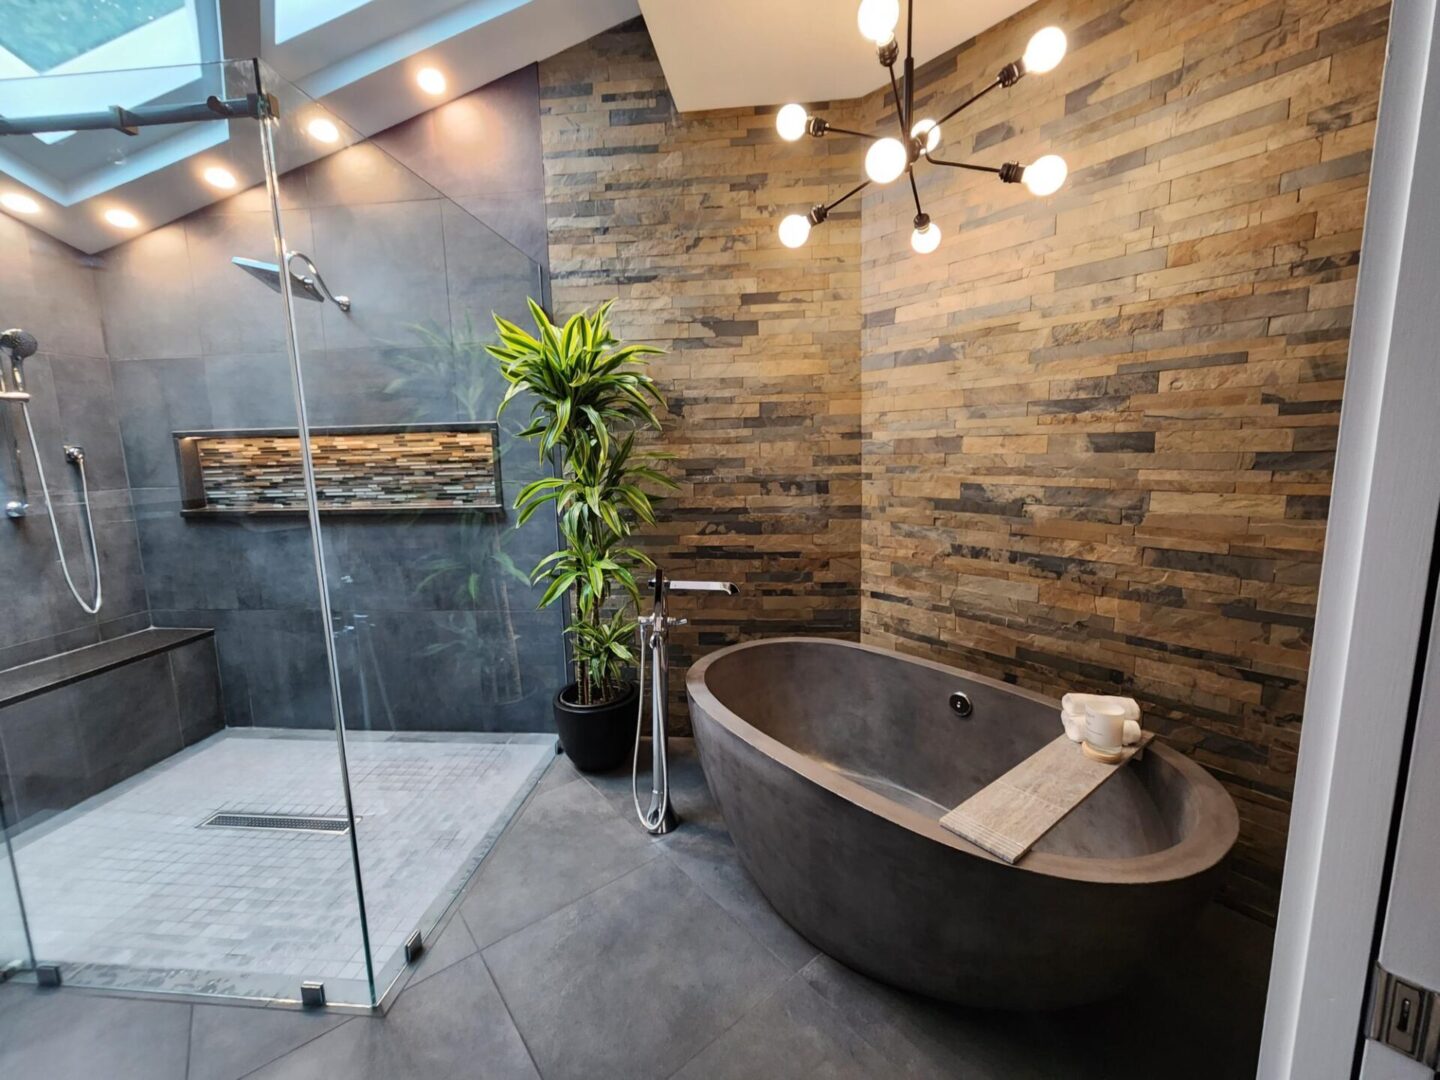 A bathroom with a tub, shower and plants.